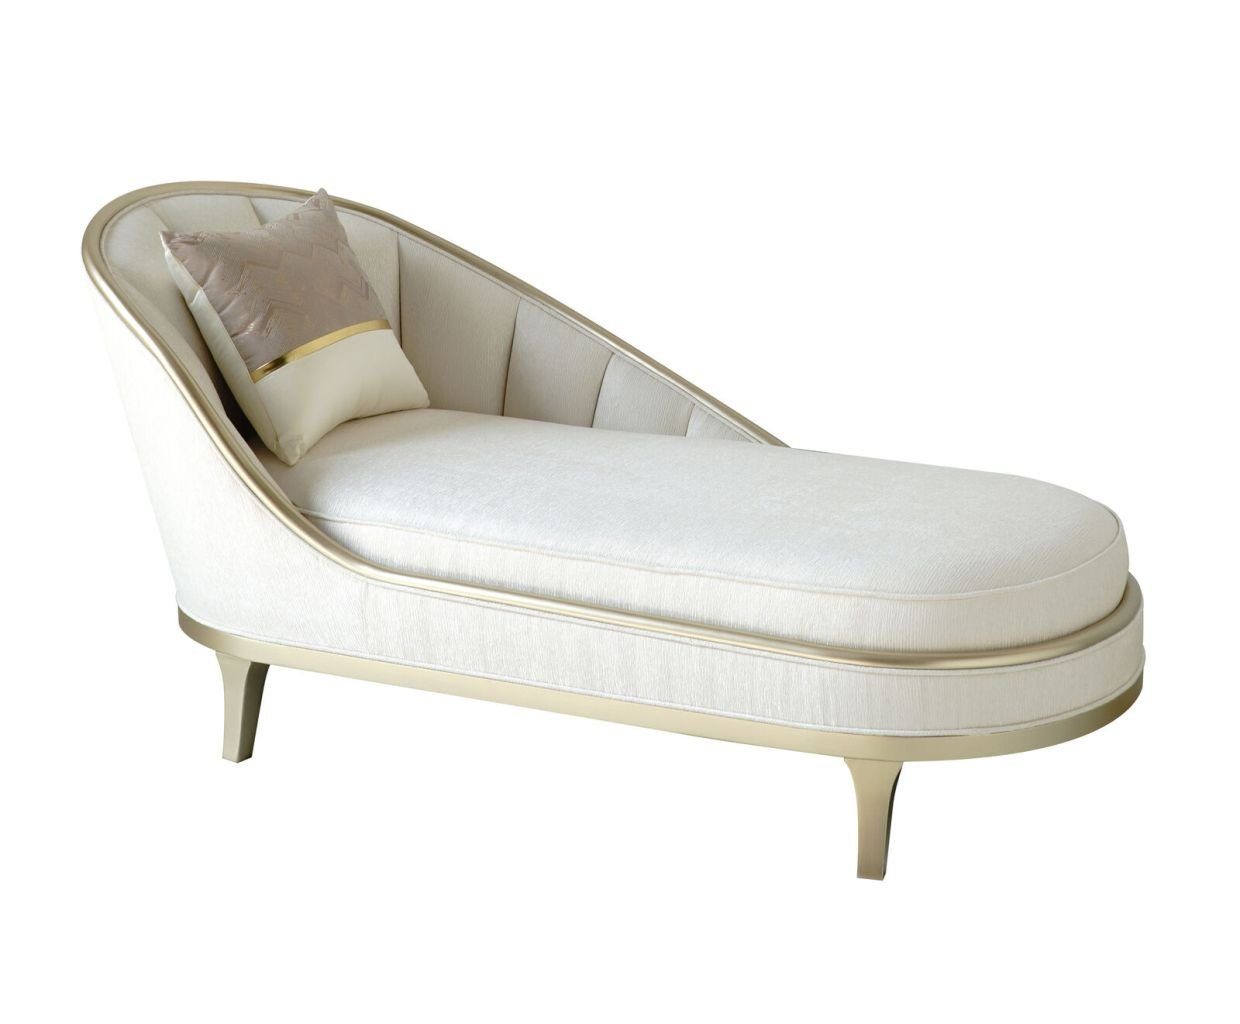 JVmoebel Wohnzimmer Moderner Chaiselongue Liege Chaiselounge Luxus Europe Chaise Couch, in Made